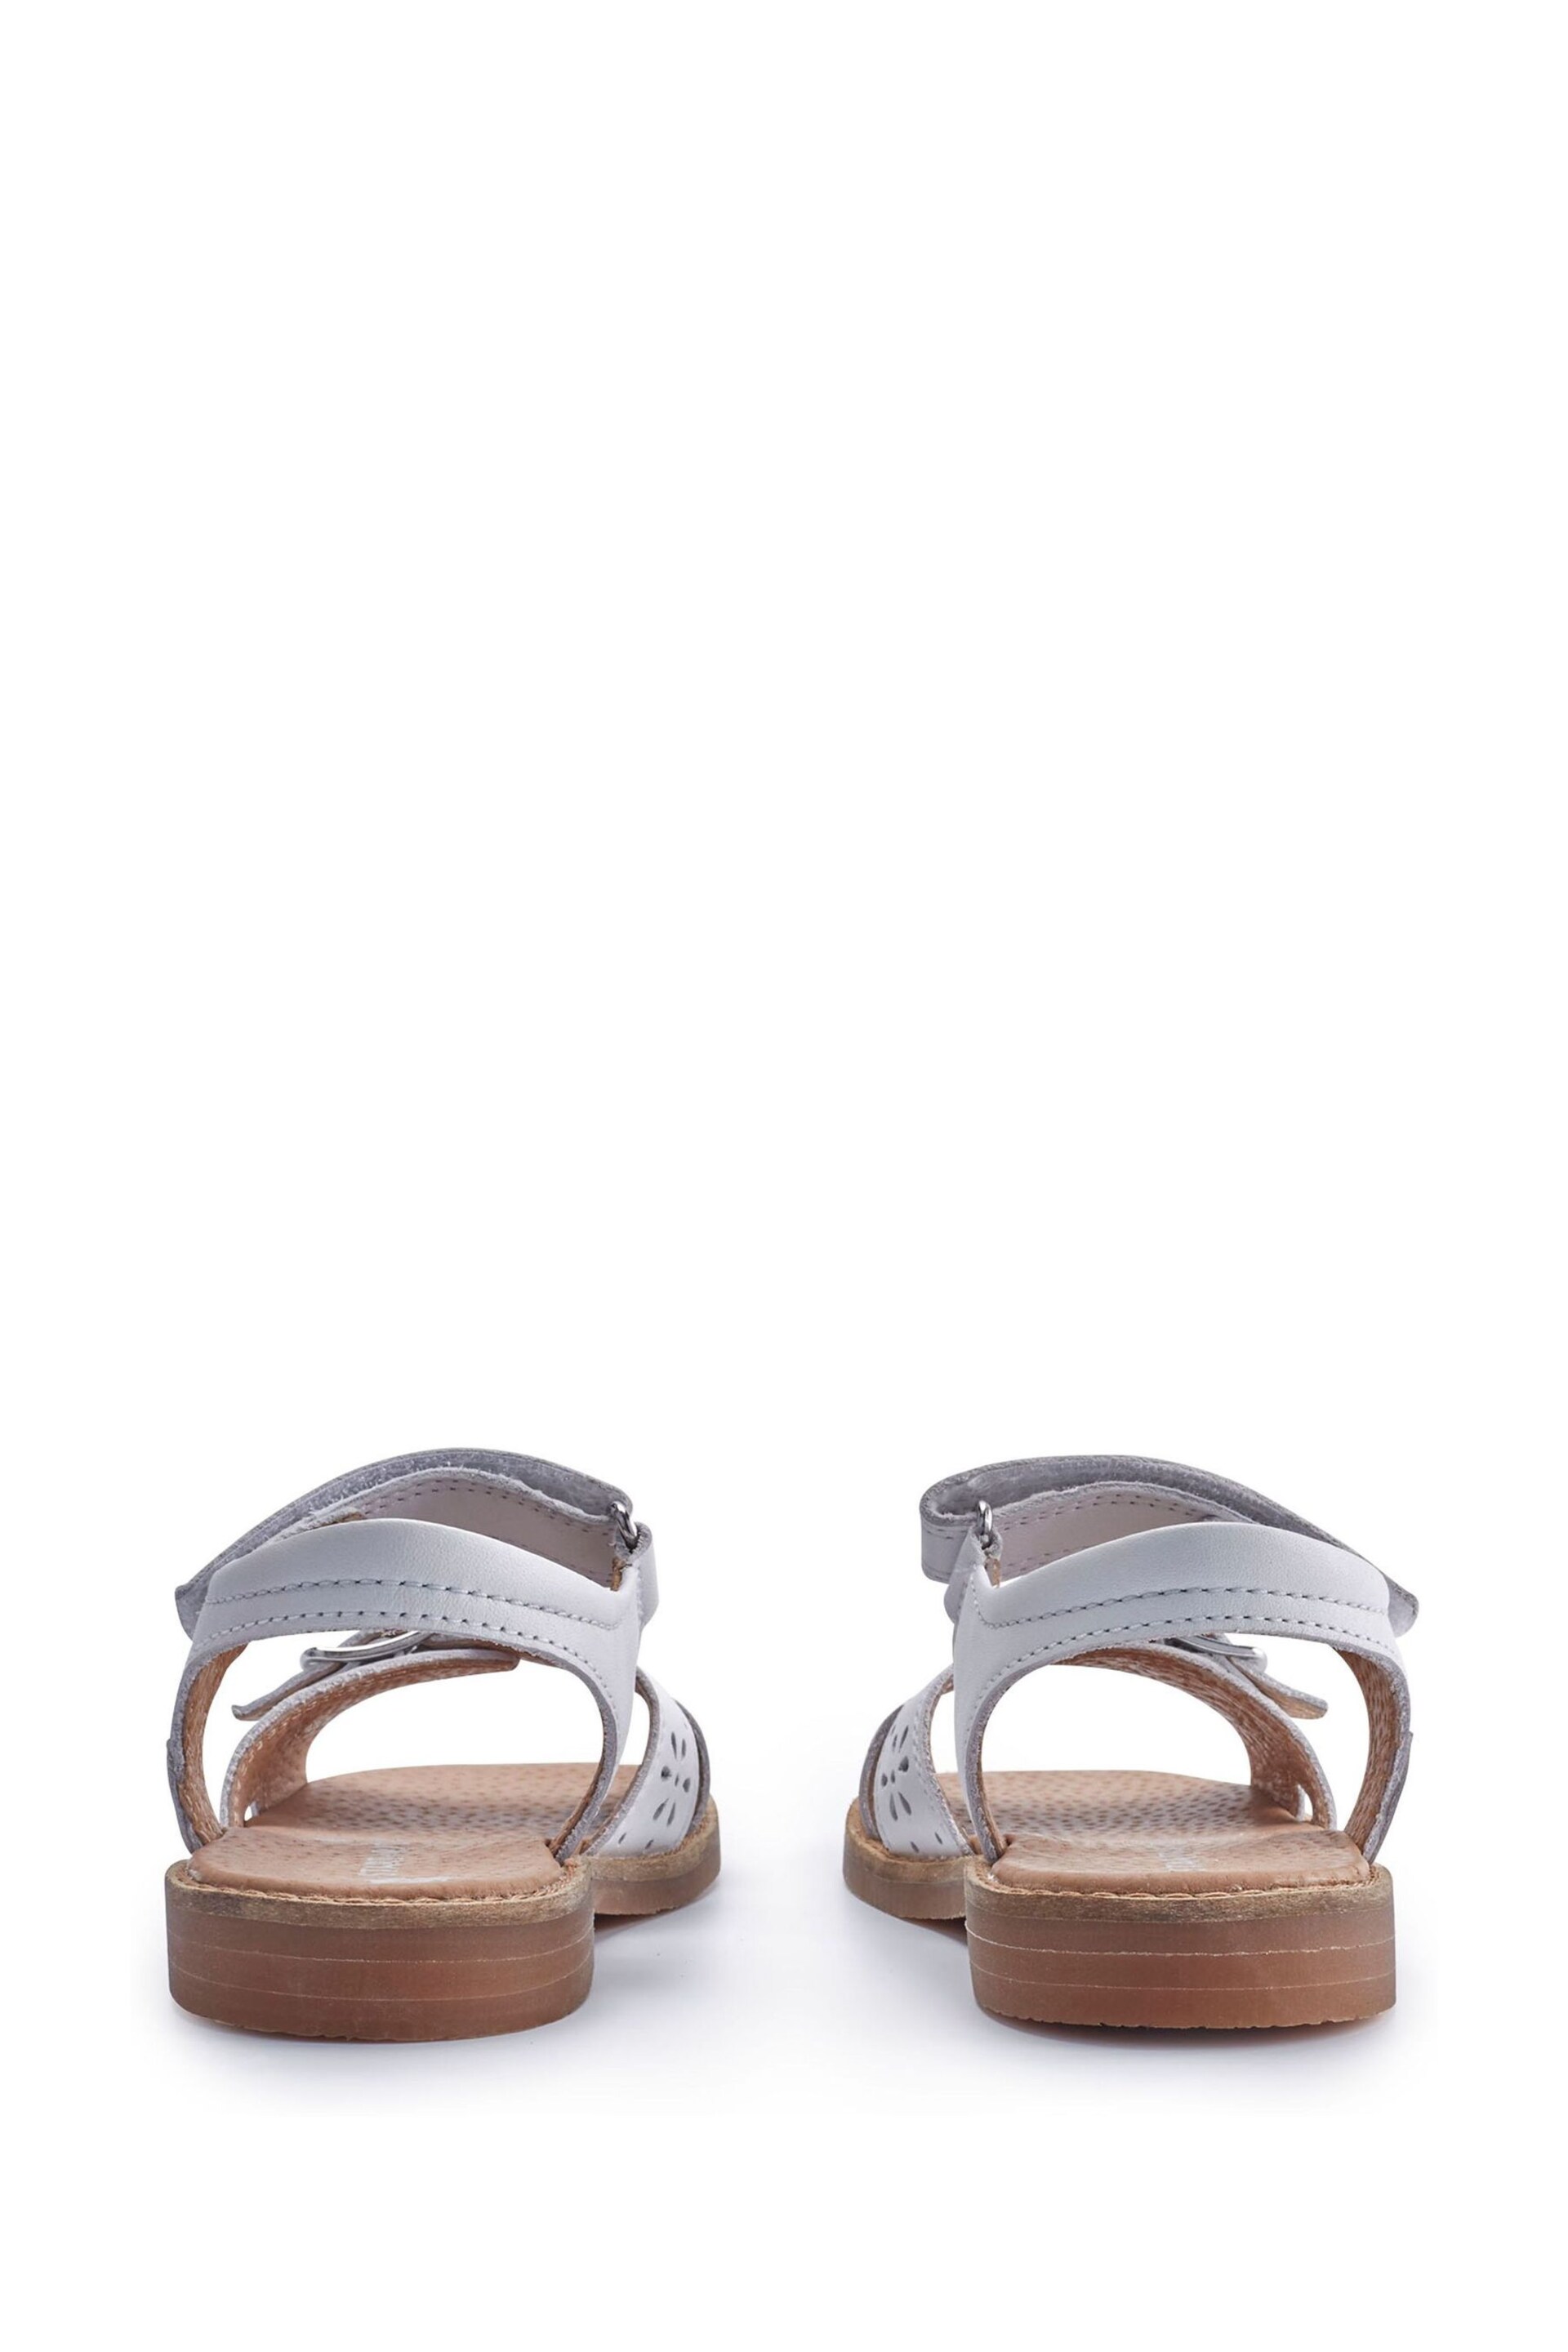 Start-Rite Holiday Leather Buckle & Rip-Tape Sandals F Fit - Image 4 of 6